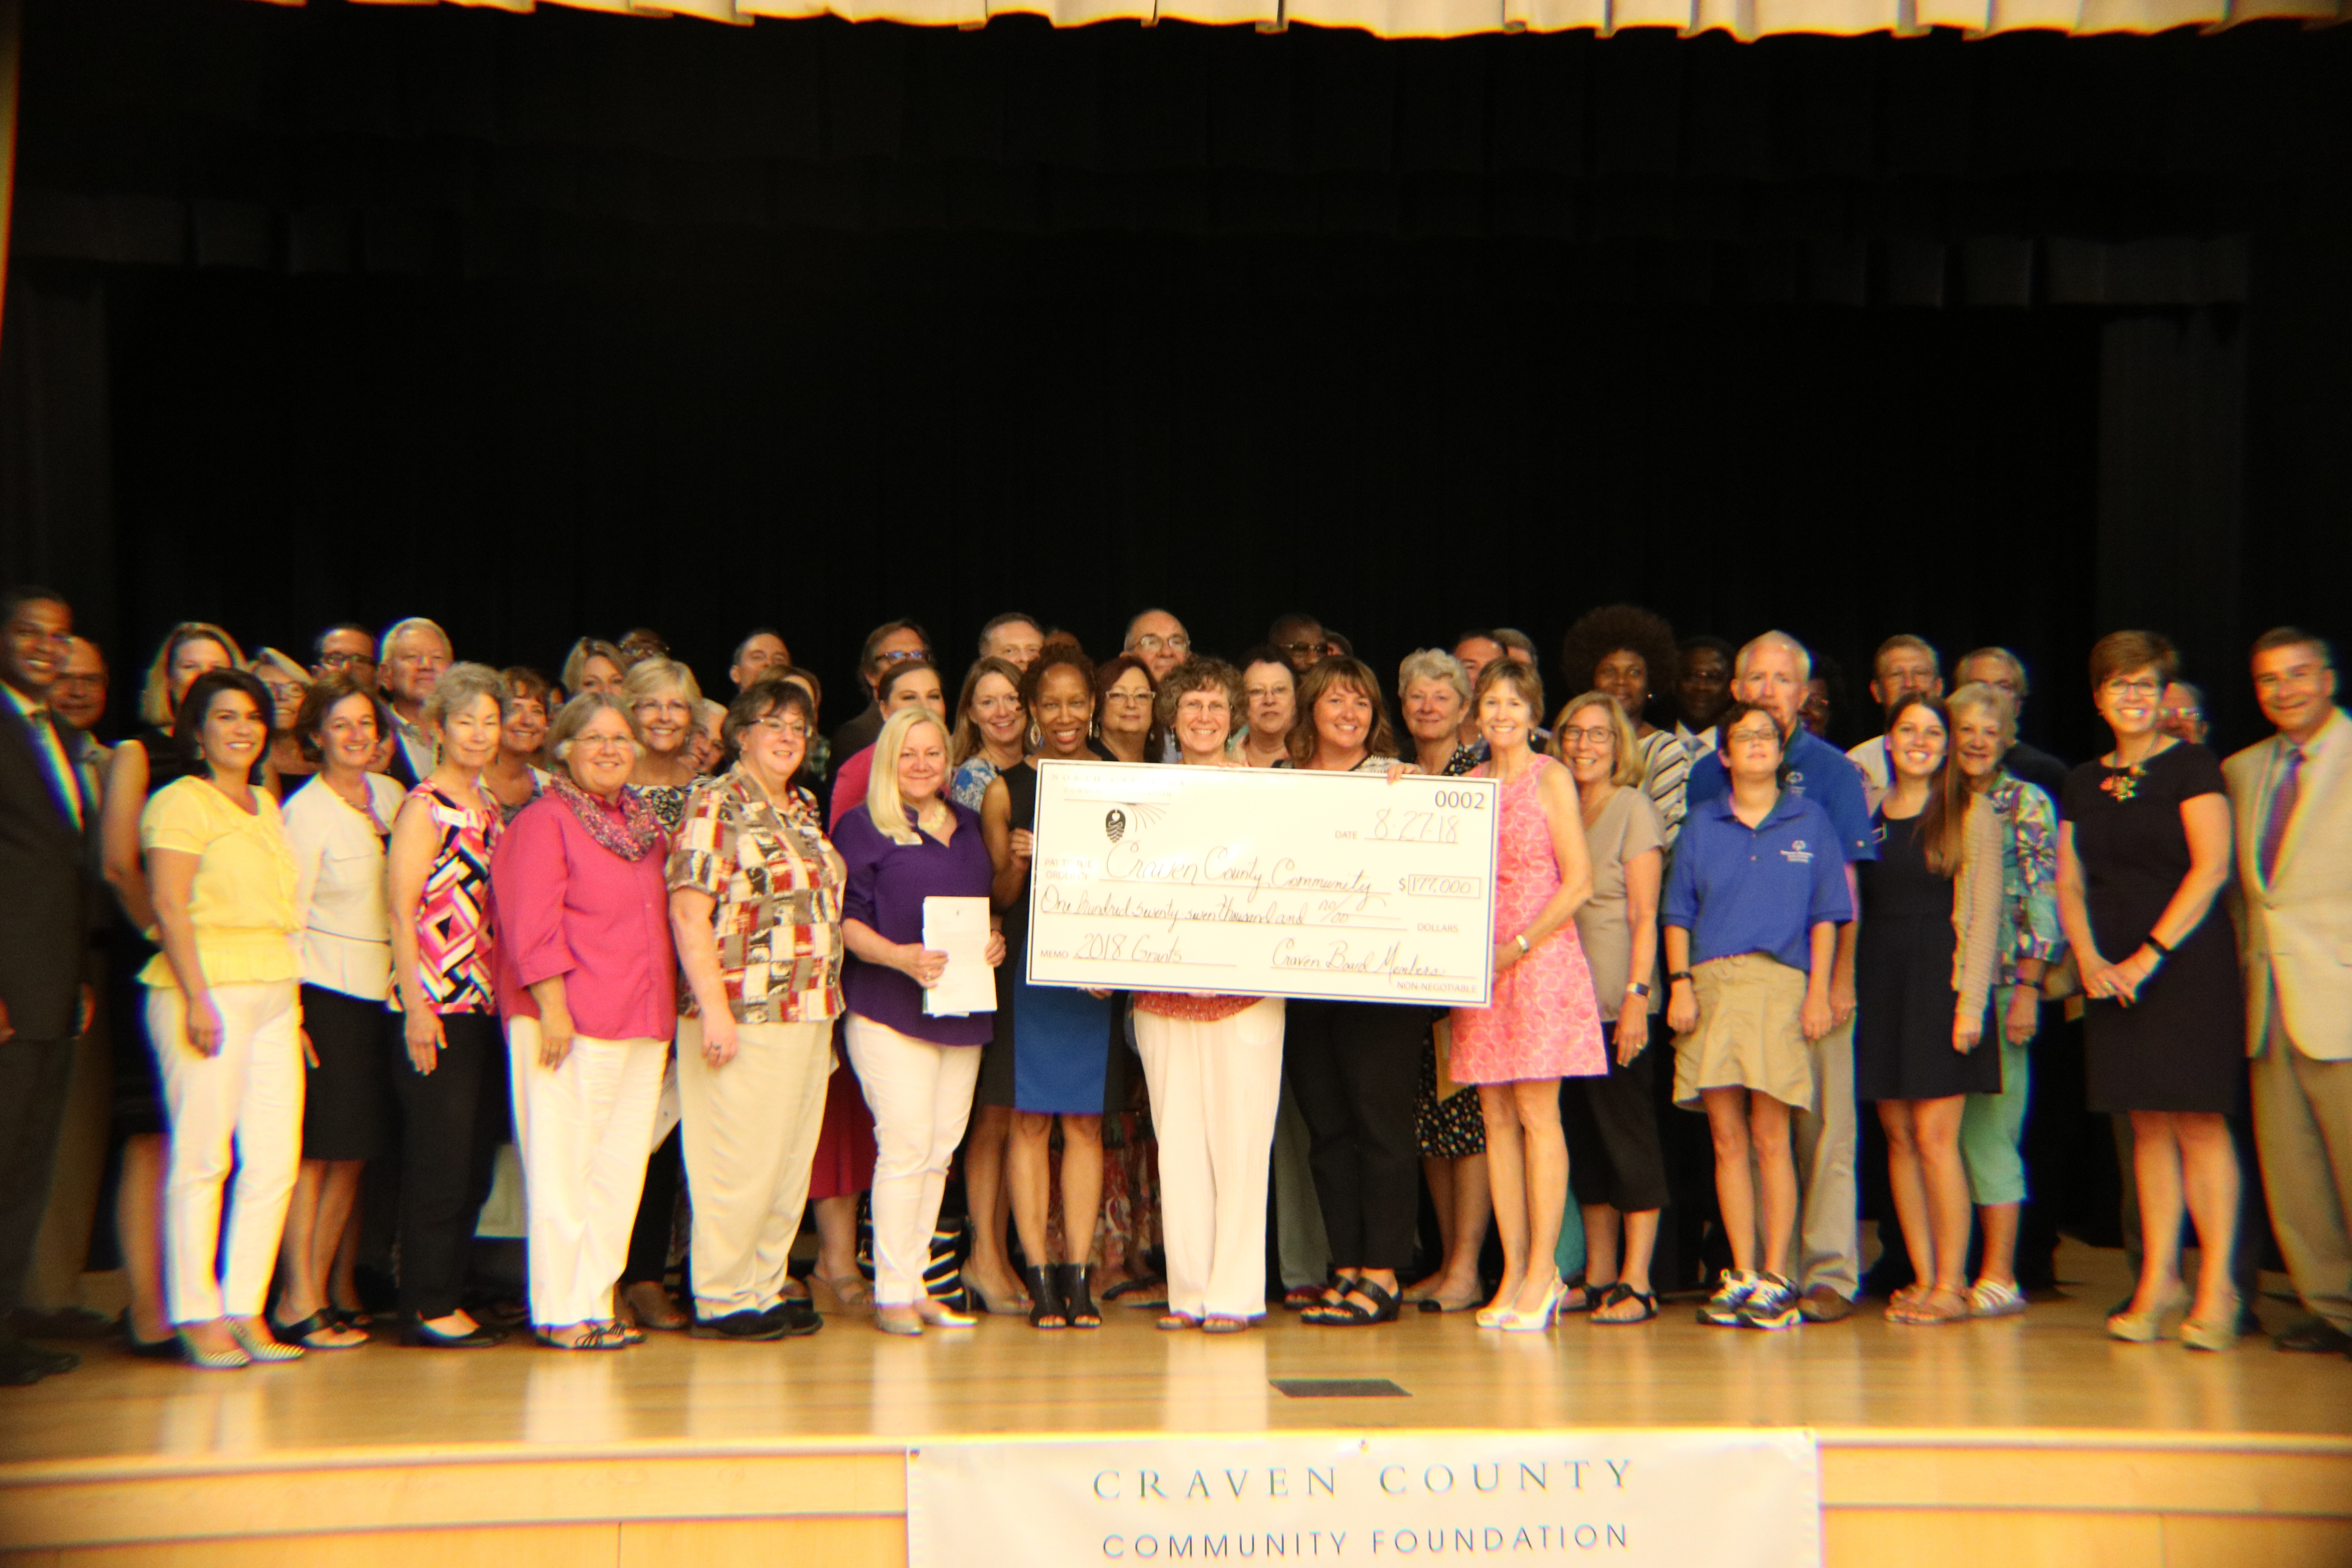 Craven County Community Foundation board members and representatives of local nonprofit organizations receiving grant awards pose for a photo following the annual CCCF grant awards ceremony at Tryon Palace.